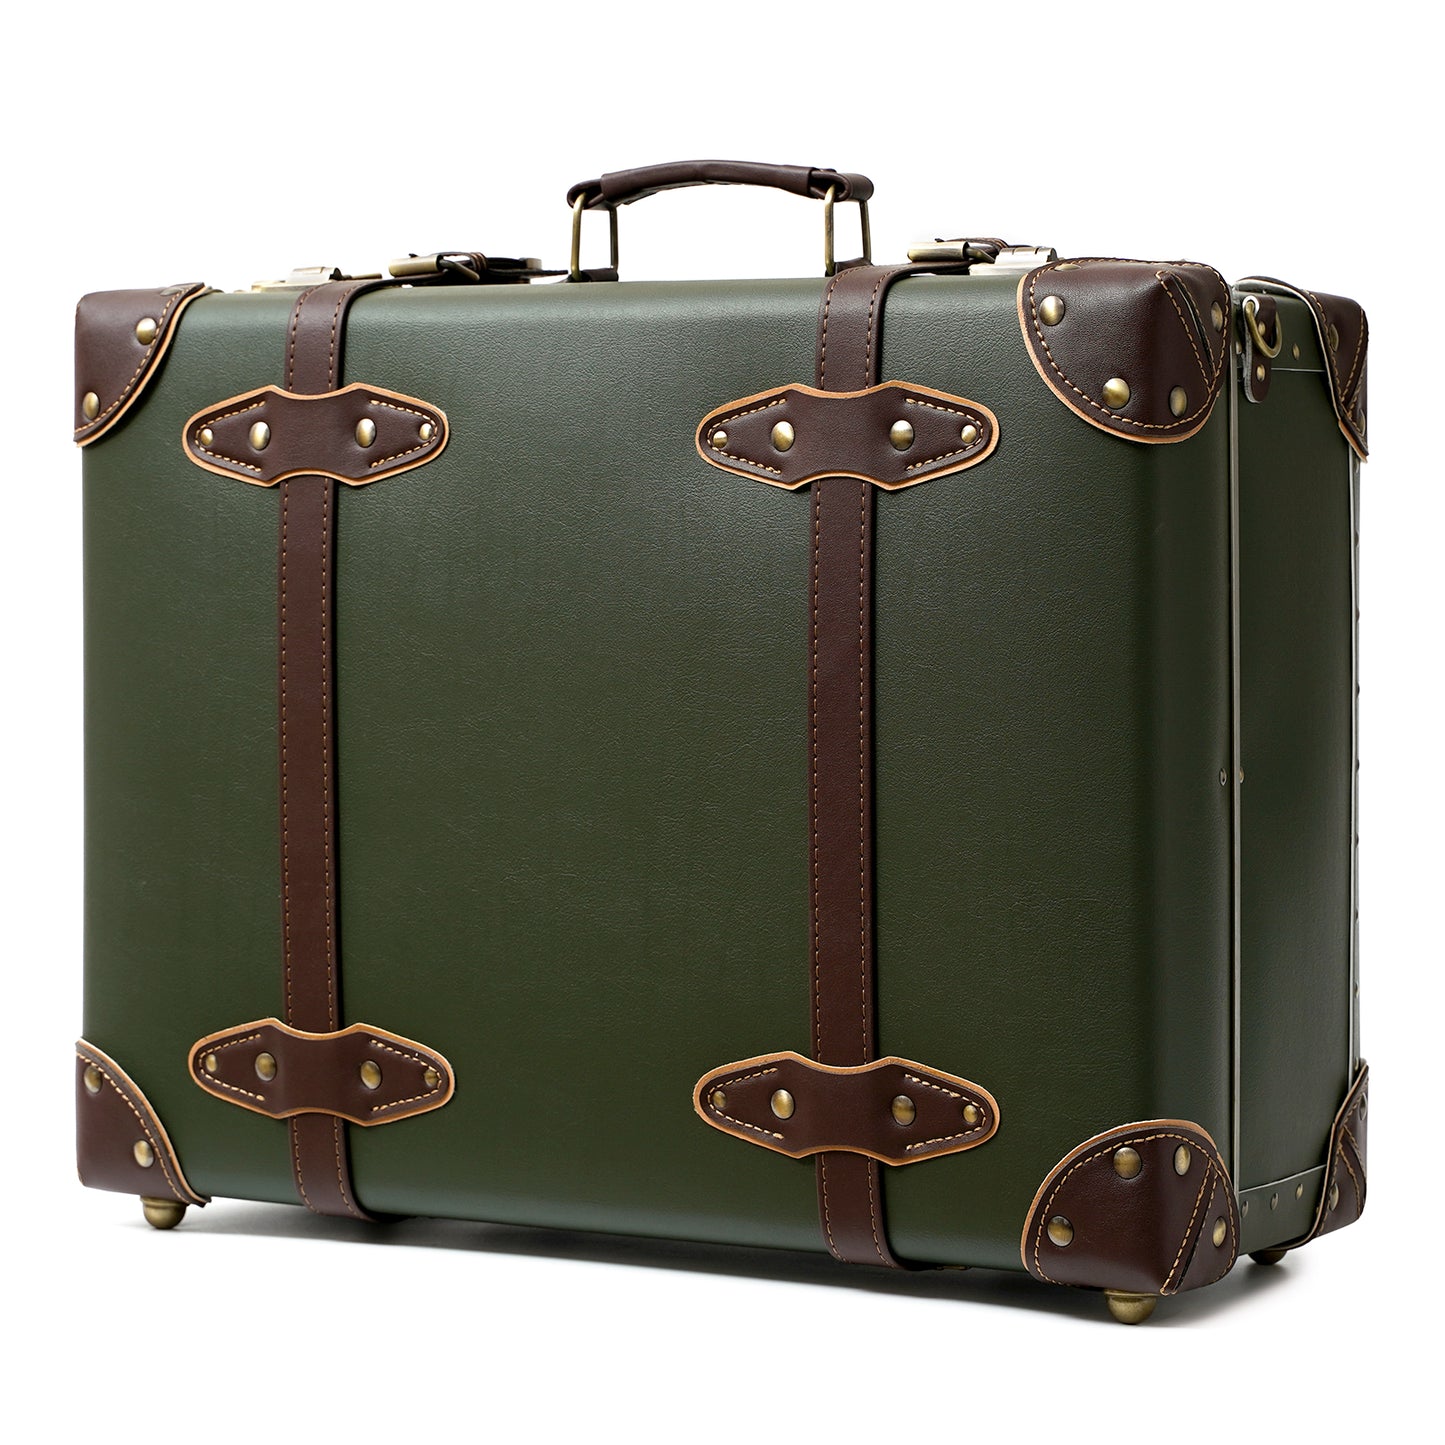 urecity Vintage and Cute Carry-on Overnight Case Non-wheeled Mini Leather Trunk Suitcase with Shoulder Strap